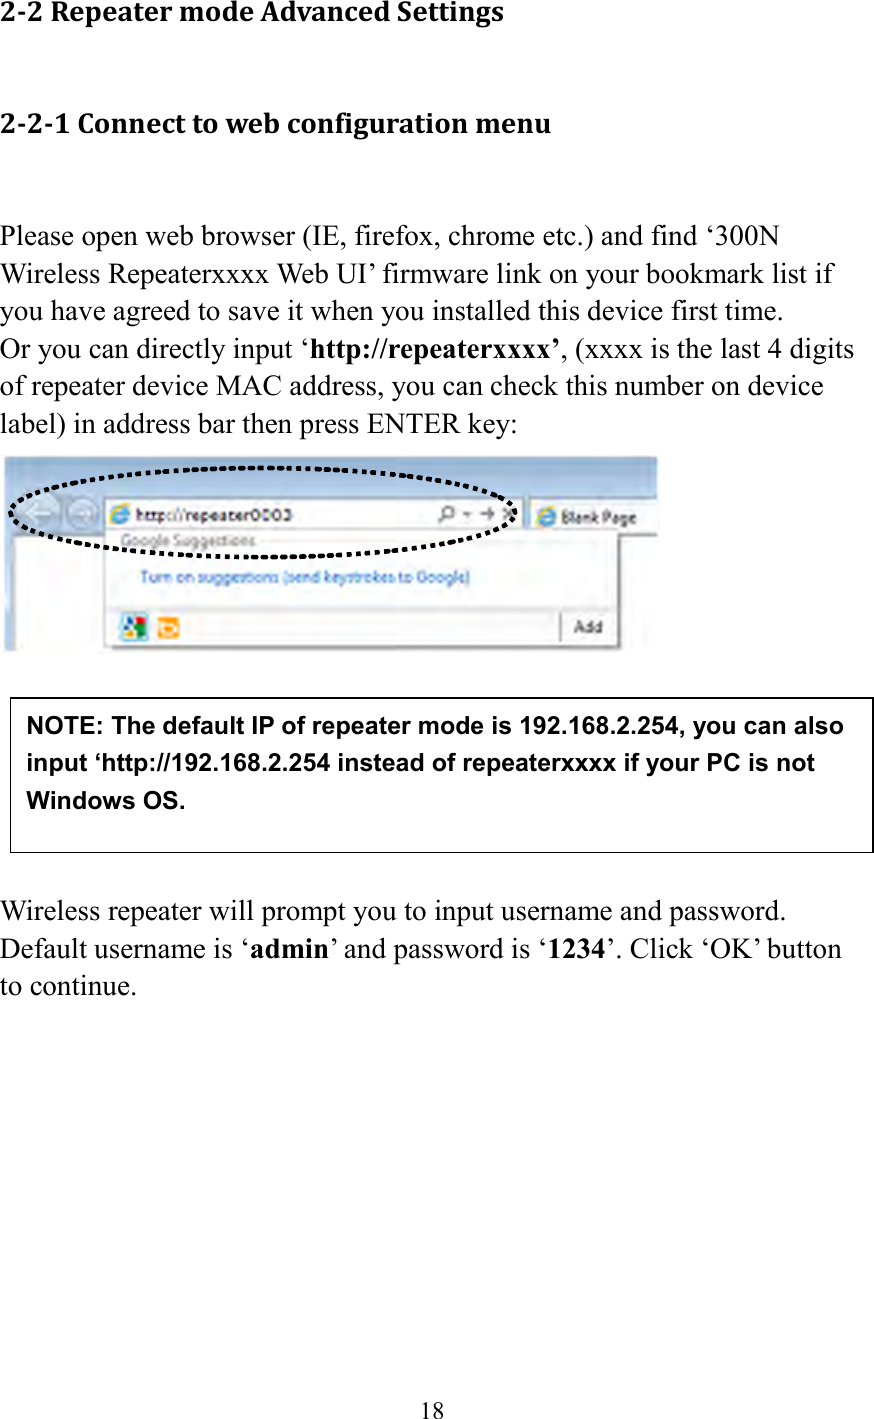  18  2-2 Repeater mode Advanced Settings 2-2-1 Connect to web configuration menu  Please open web browser (IE, firefox, chrome etc.) and find ‘300N Wireless Repeaterxxxx Web UI’ firmware link on your bookmark list if you have agreed to save it when you installed this device first time.   Or you can directly input ‘http://repeaterxxxx’, (xxxx is the last 4 digits of repeater device MAC address, you can check this number on device label) in address bar then press ENTER key:        Wireless repeater will prompt you to input username and password. Default username is ‘admin’ and password is ‘1234’. Click ‘OK’ button to continue.  NOTE: The default IP of repeater mode is 192.168.2.254, you can also input ‘http://192.168.2.254 instead of repeaterxxxx if your PC is not Windows OS. 